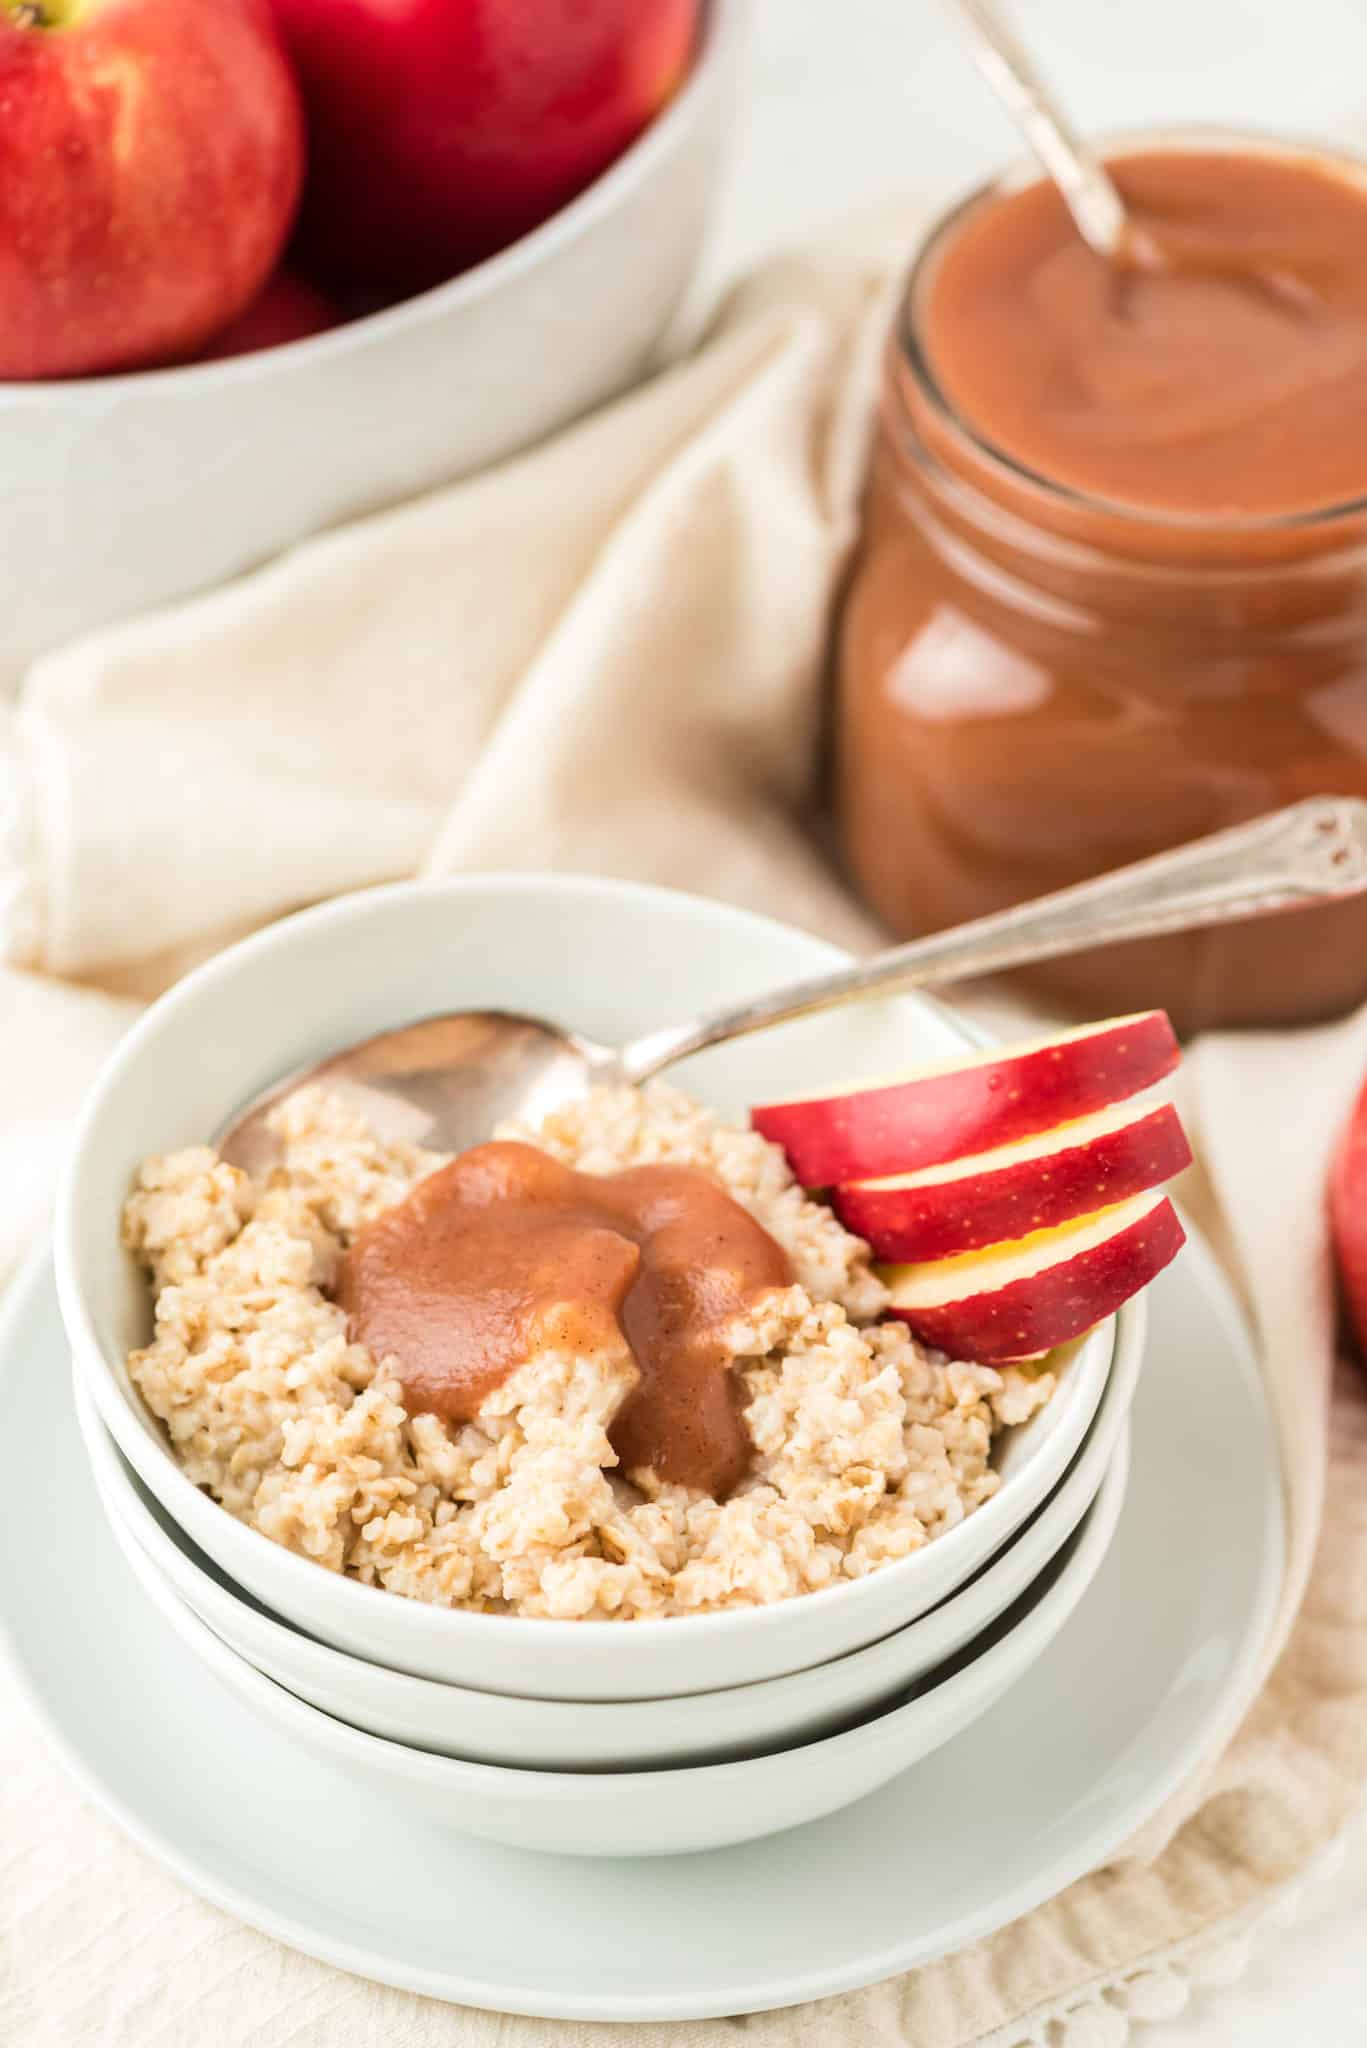 apple butter served on oatmeal